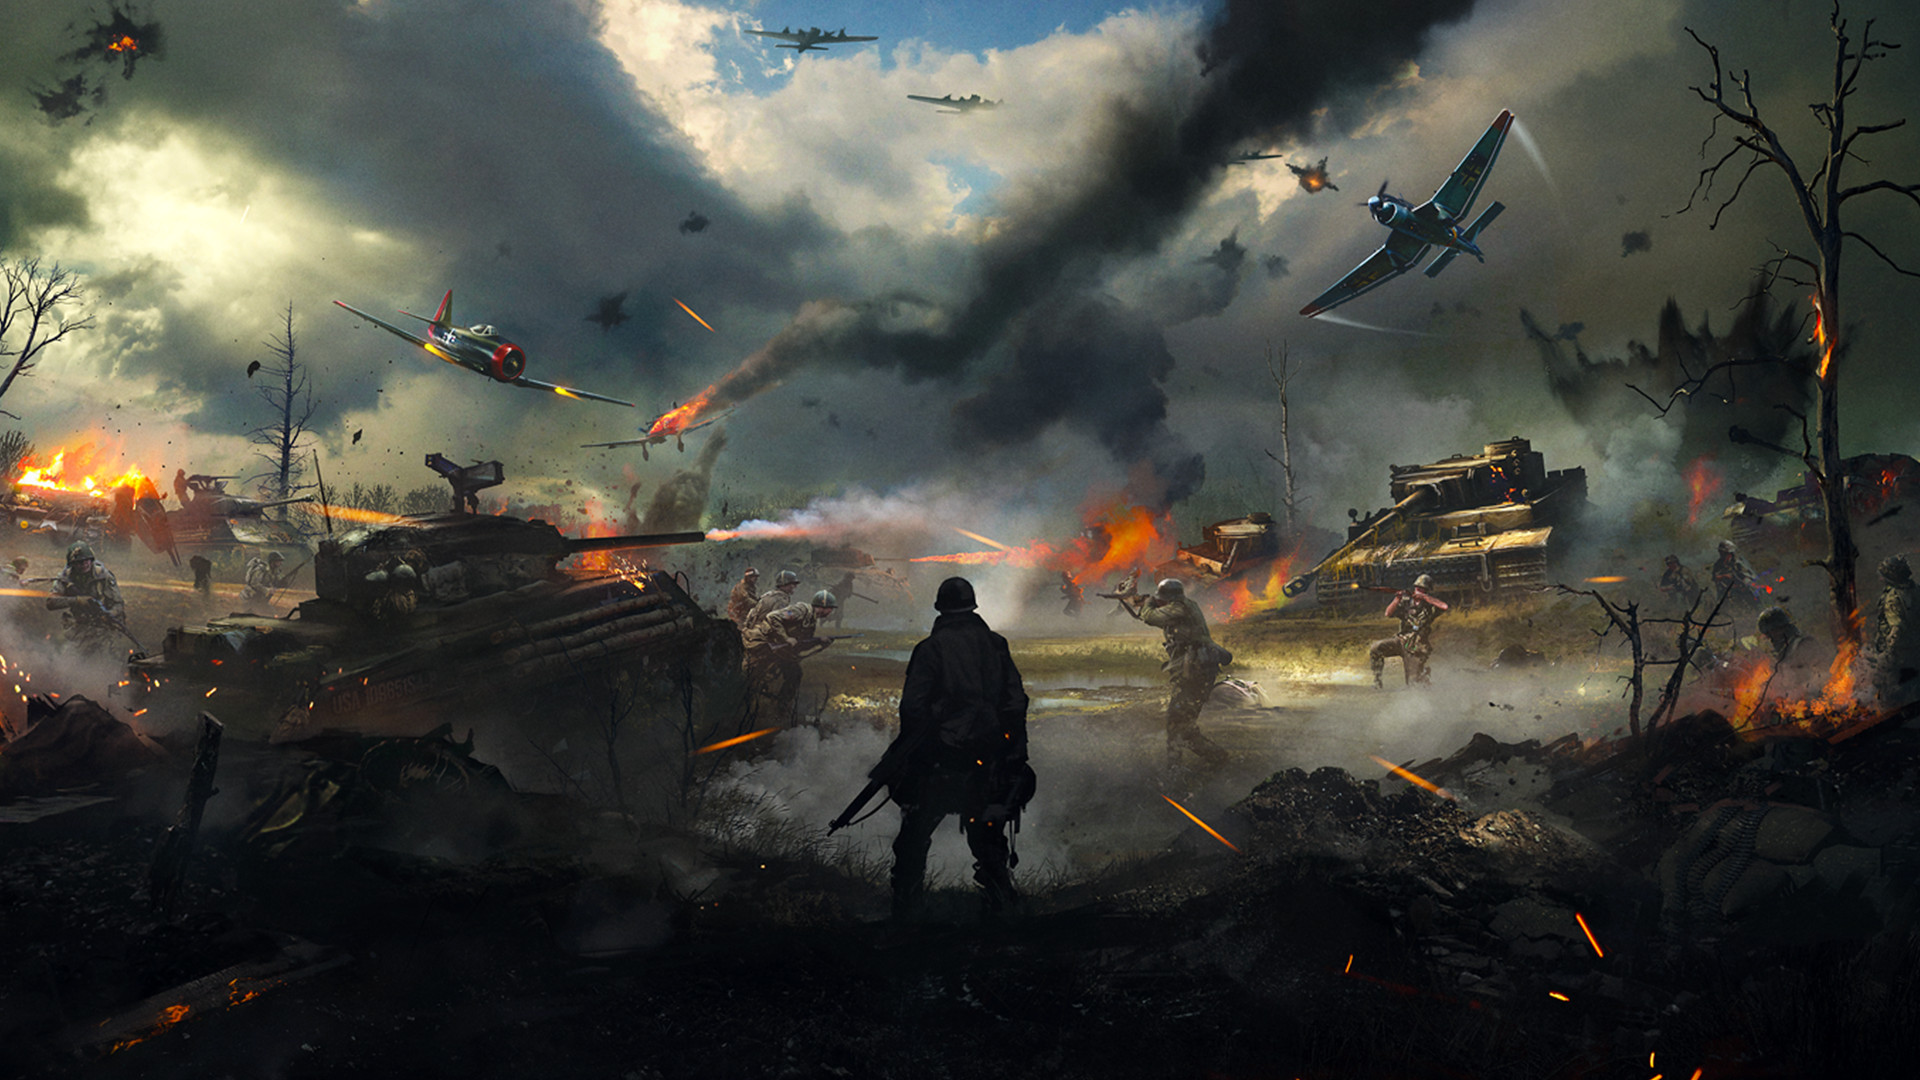 Hell Let Loose commander: A soldier stood on a battleground as planes and tanks fight around him.